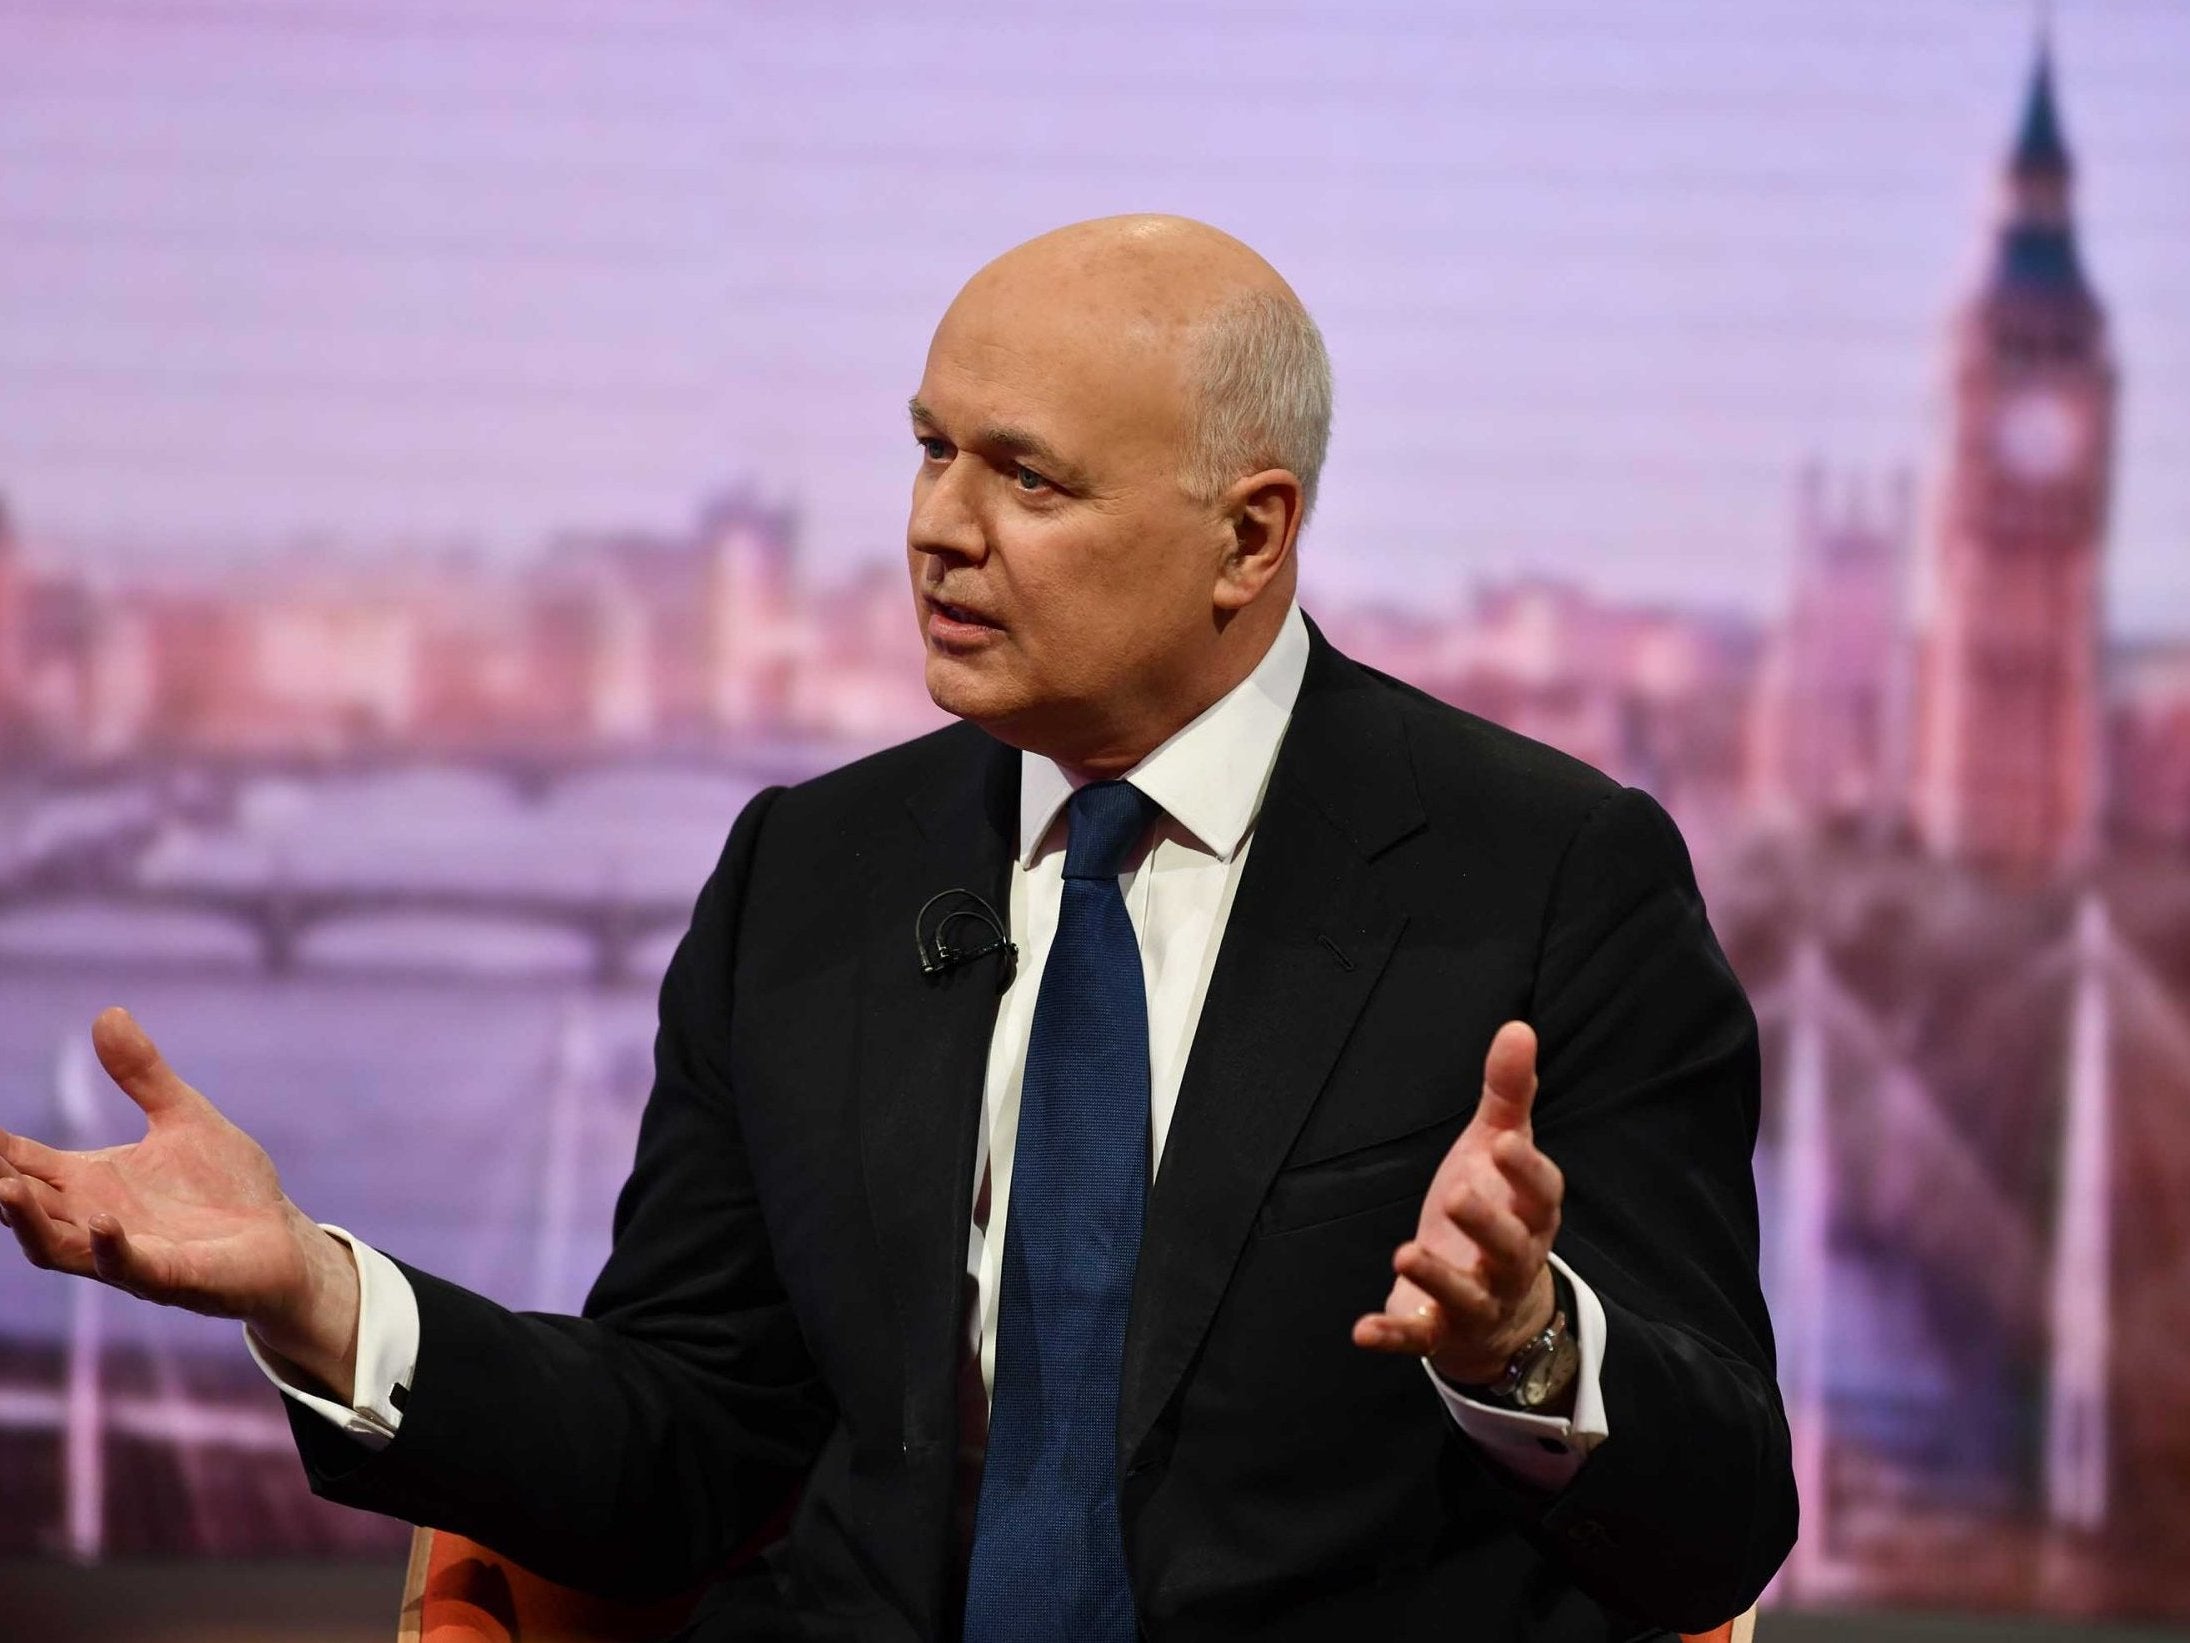 Iain Duncan Smith voted for the agreement